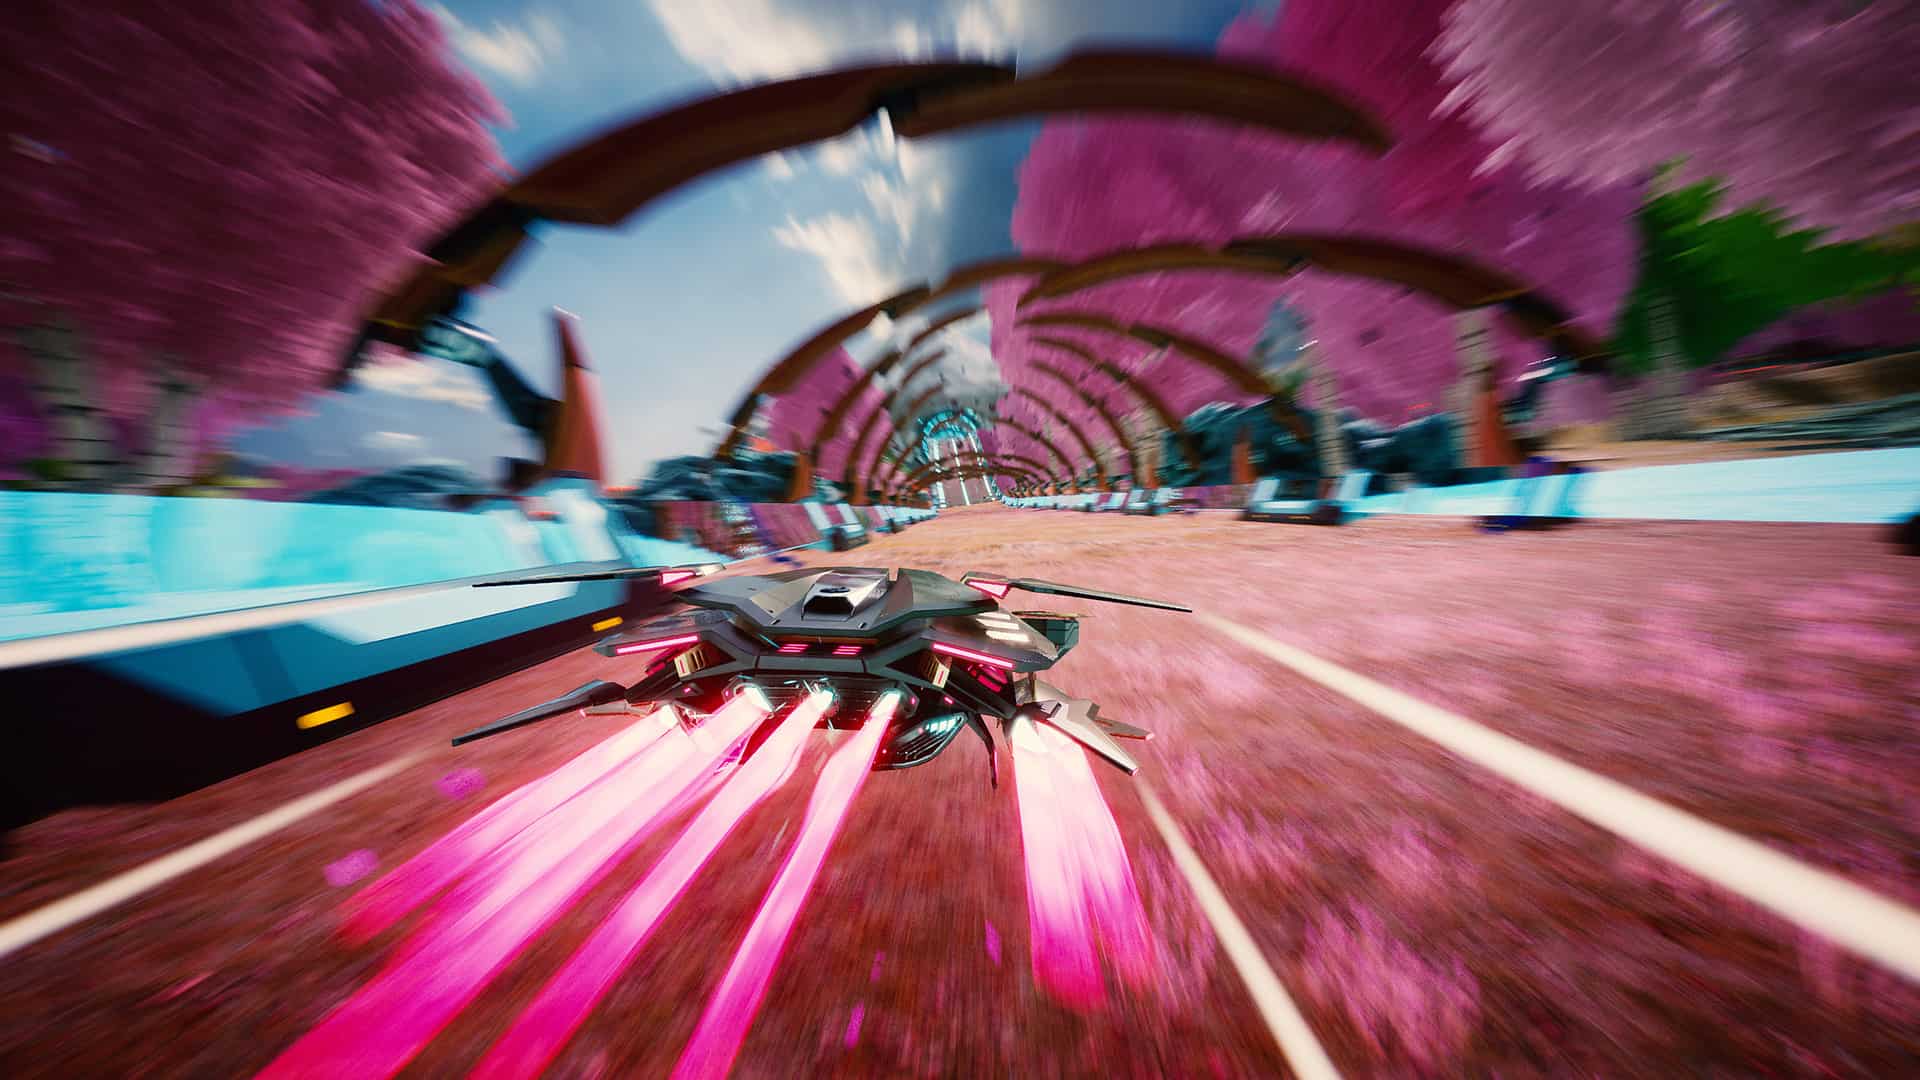 Redout 2 is coming in 2022 to revive anti-gravity racing